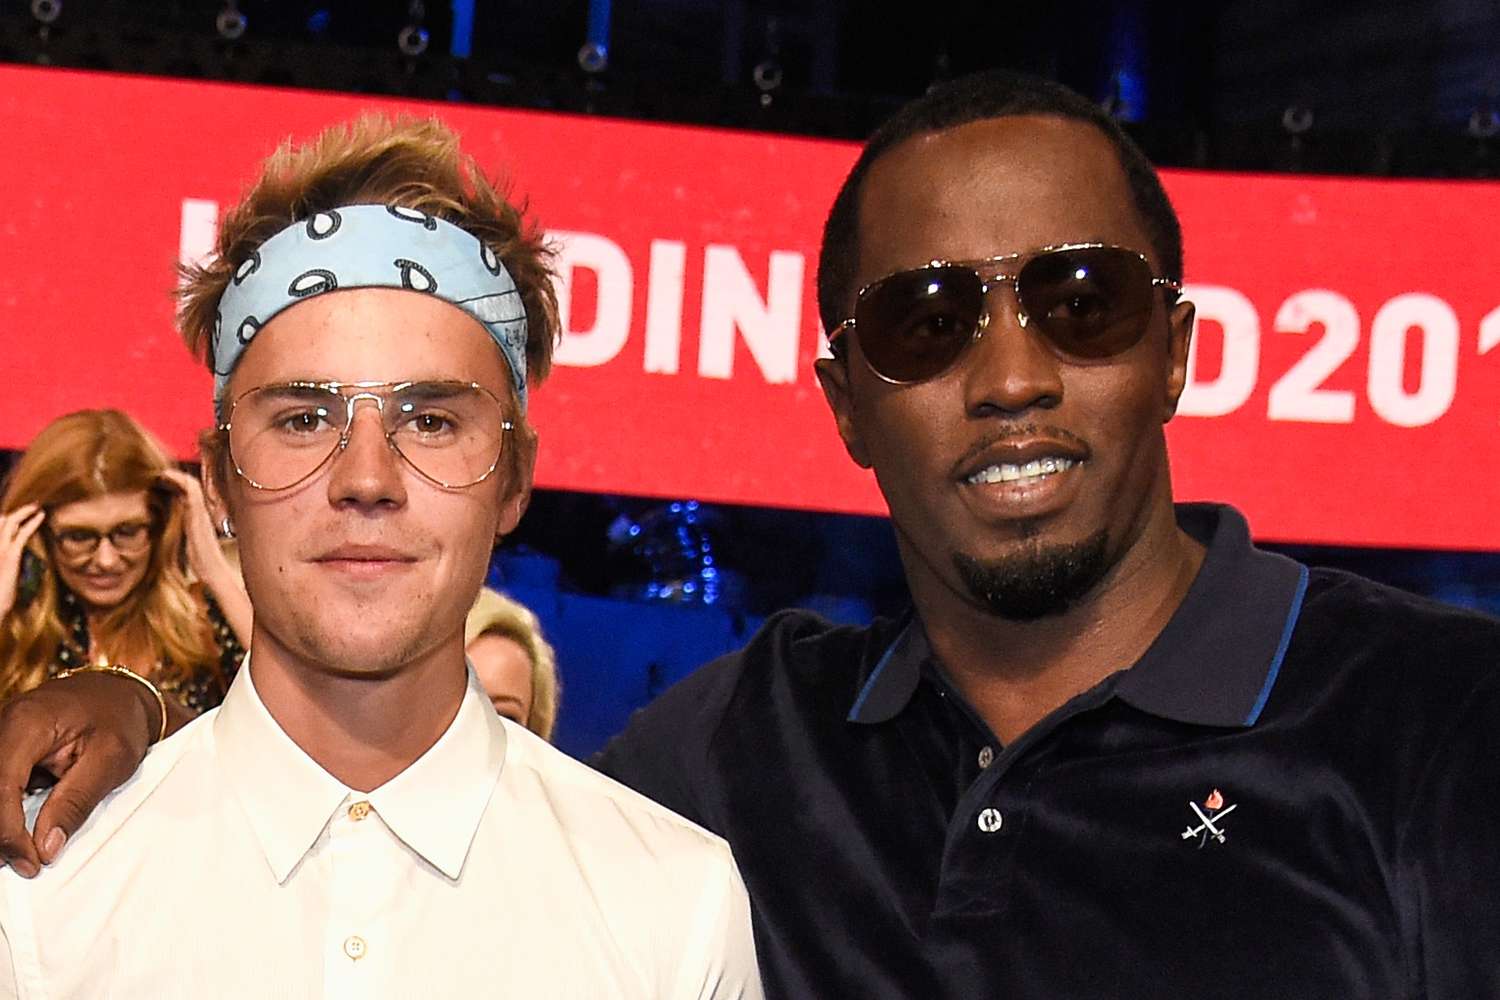 Justin Bieber and Sean 'Diddy' Combs